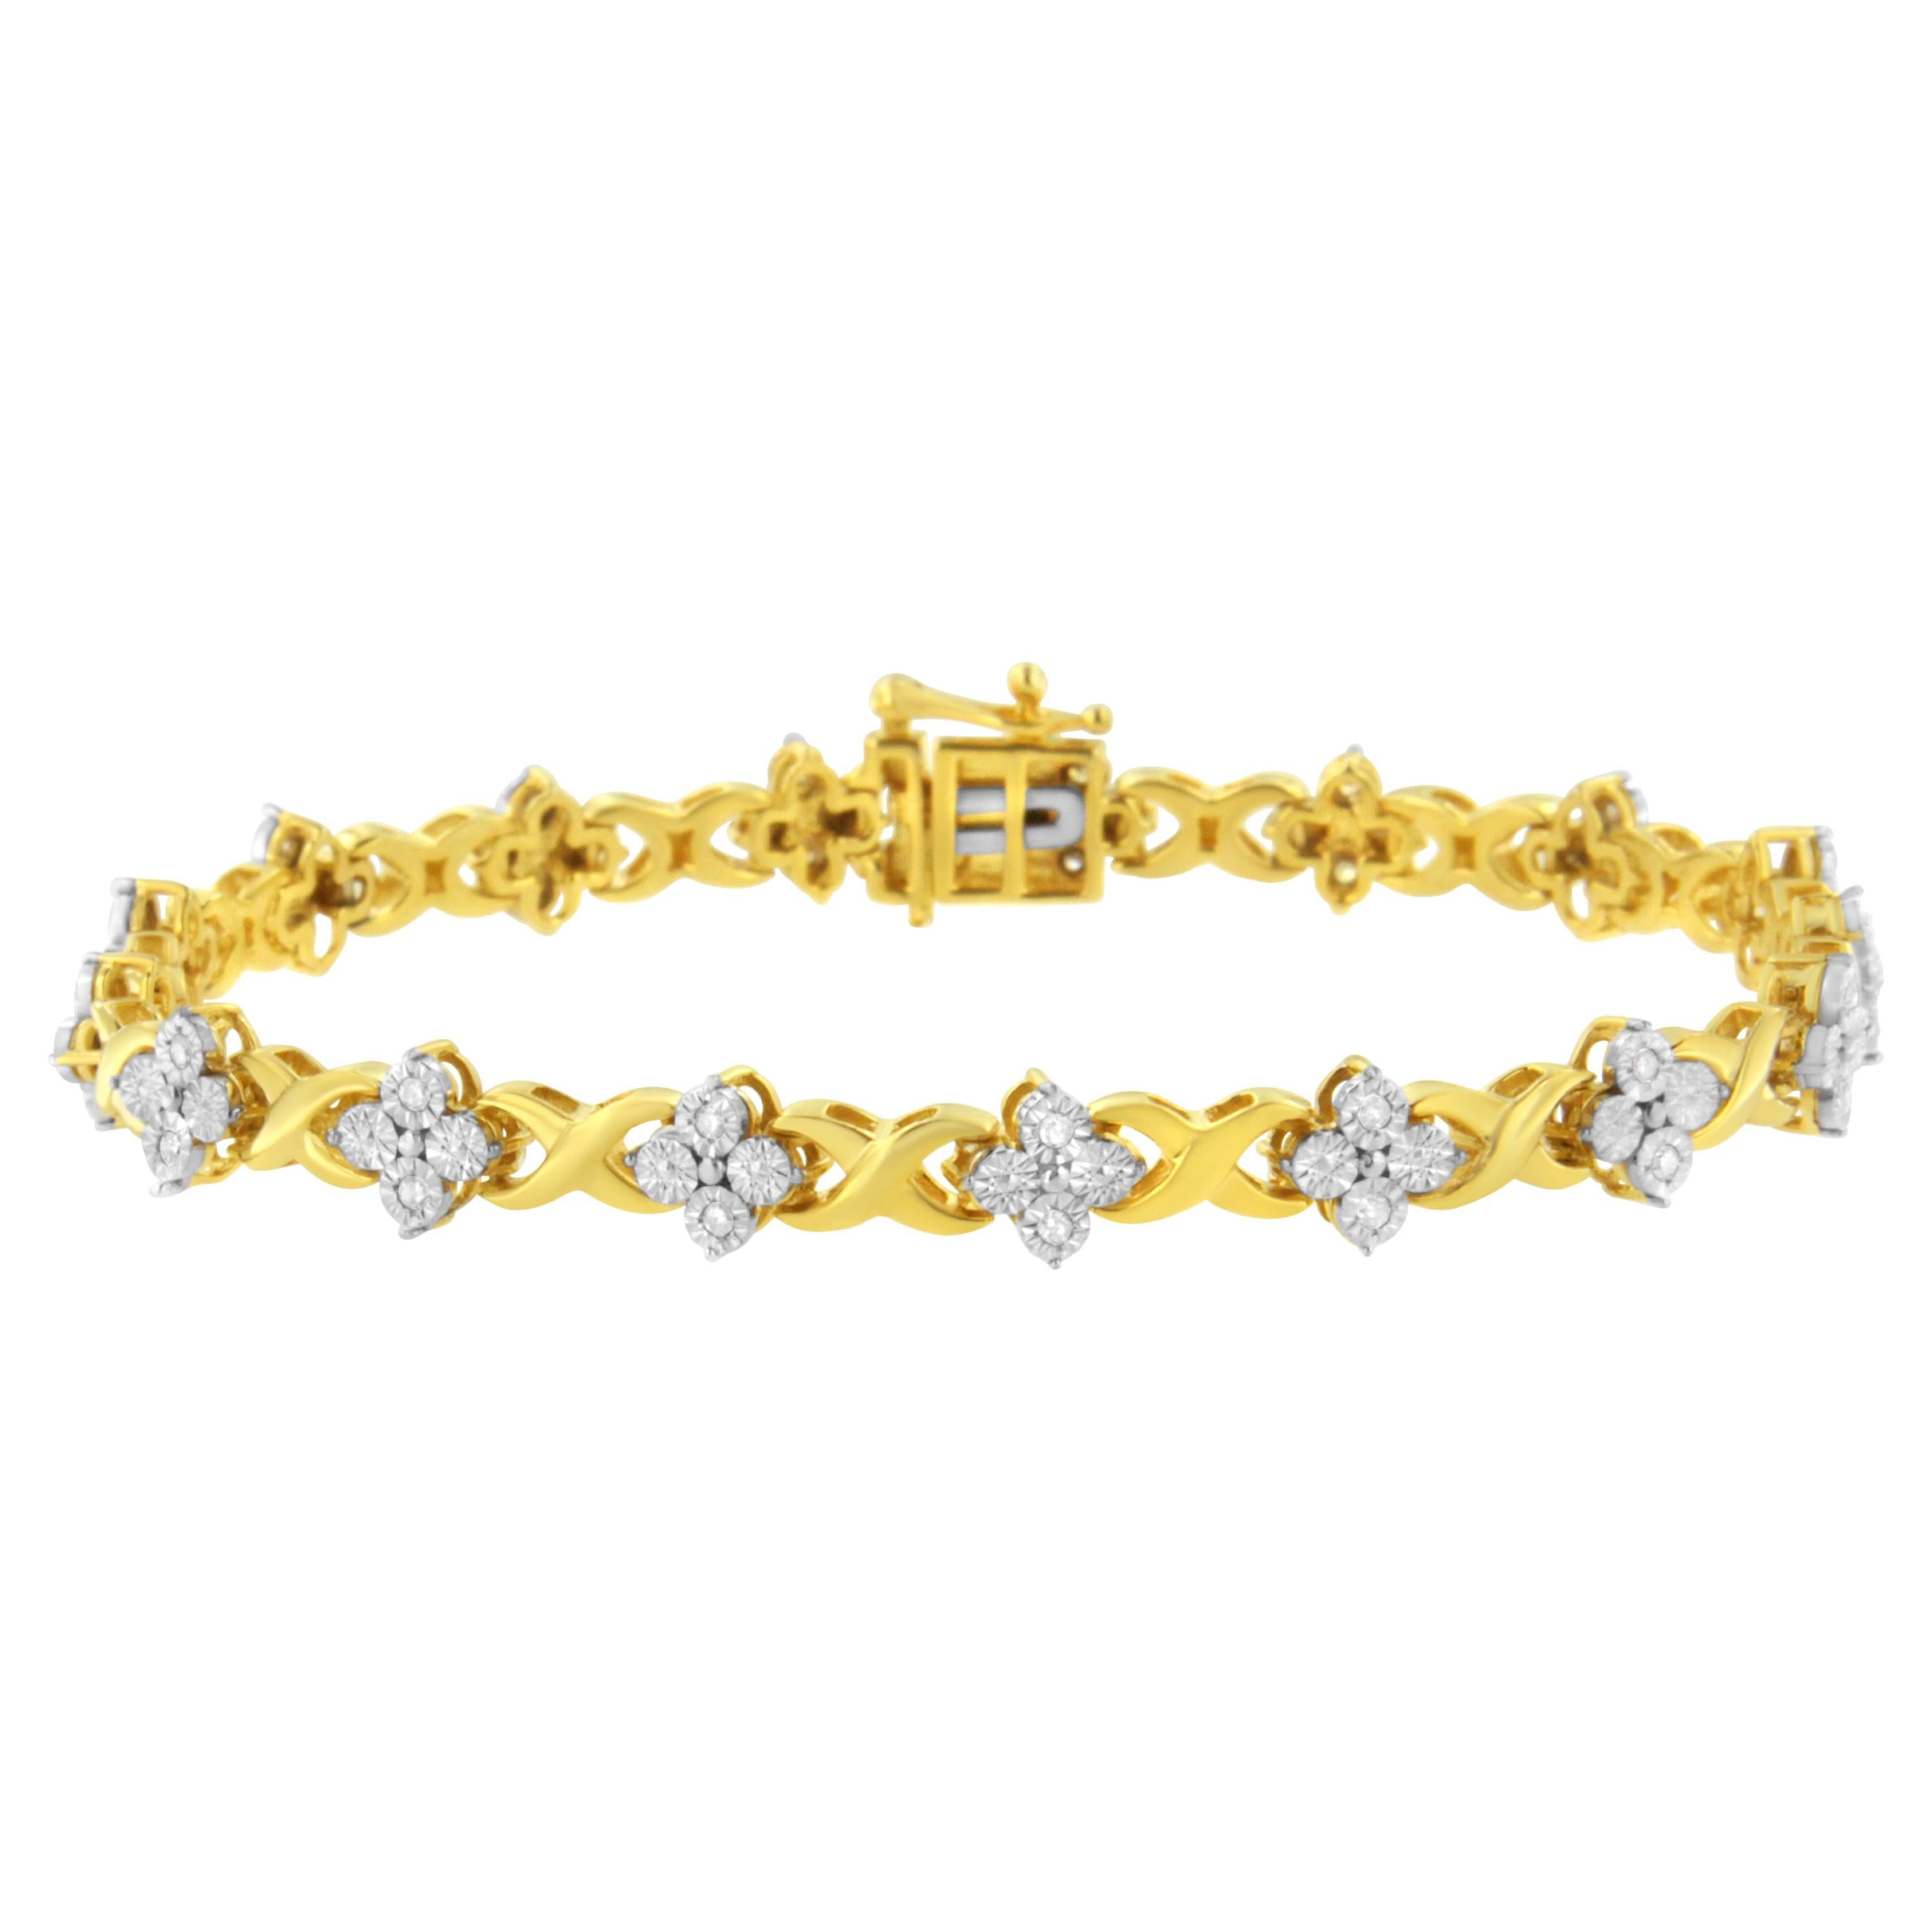 Yellow Gold Plated Sterling Silver 1/4 Carat Diamond Link Tennis Bracelet